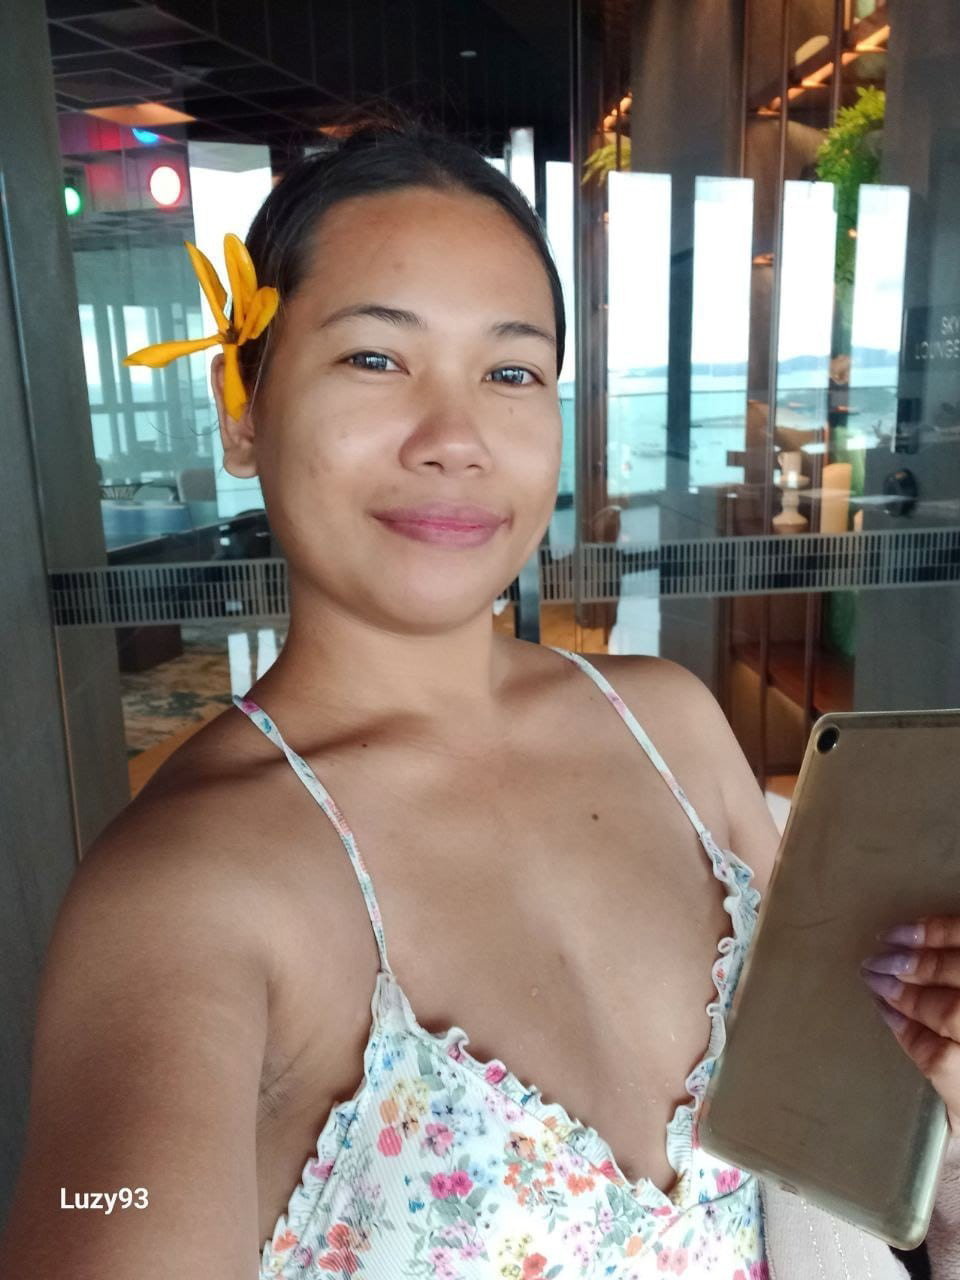 Watch the Photo by LuzyThai with the username @LuzyThai, who is a star user, posted on July 30, 2023 and the text says '#thai #thailand #asian #asia #thaigirl #thaibabe #onlyfans #Contentcreater #loyalfans #asiandoll #girlnextdoor #nudes #amateur #homemade #closeups #pussy
Join me now! FREE TRIAL⚡ https://onlyfans.com/action/trial/x2qpkm5il6mryxbmzmr2uk7kv2dav7g5'